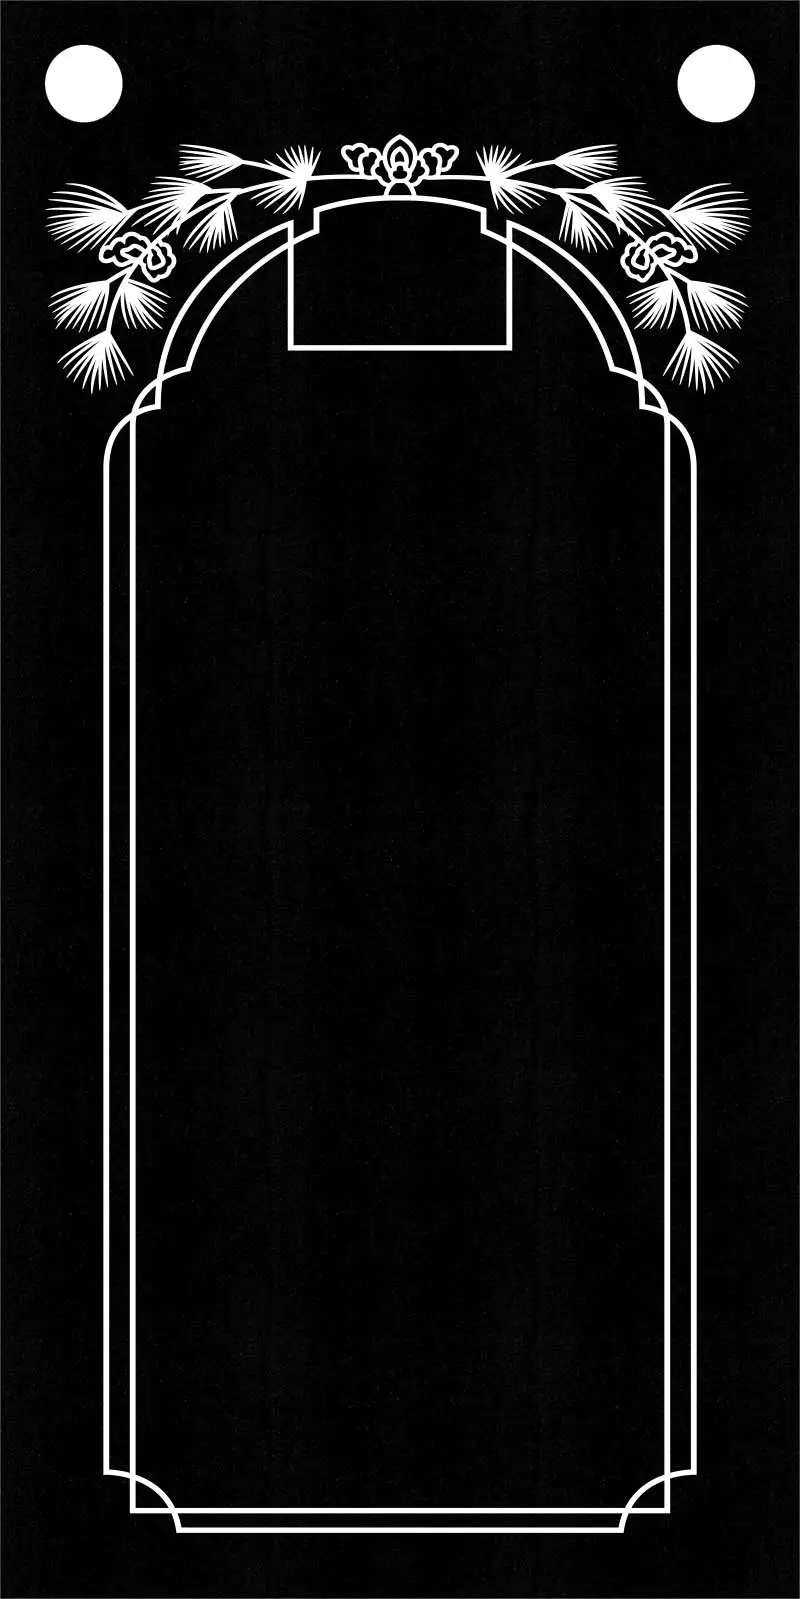 MMFL-111 Examples of Engraved Borders o Flat Granite Memorial Ledgers for gravesites, grave markers, significant events.